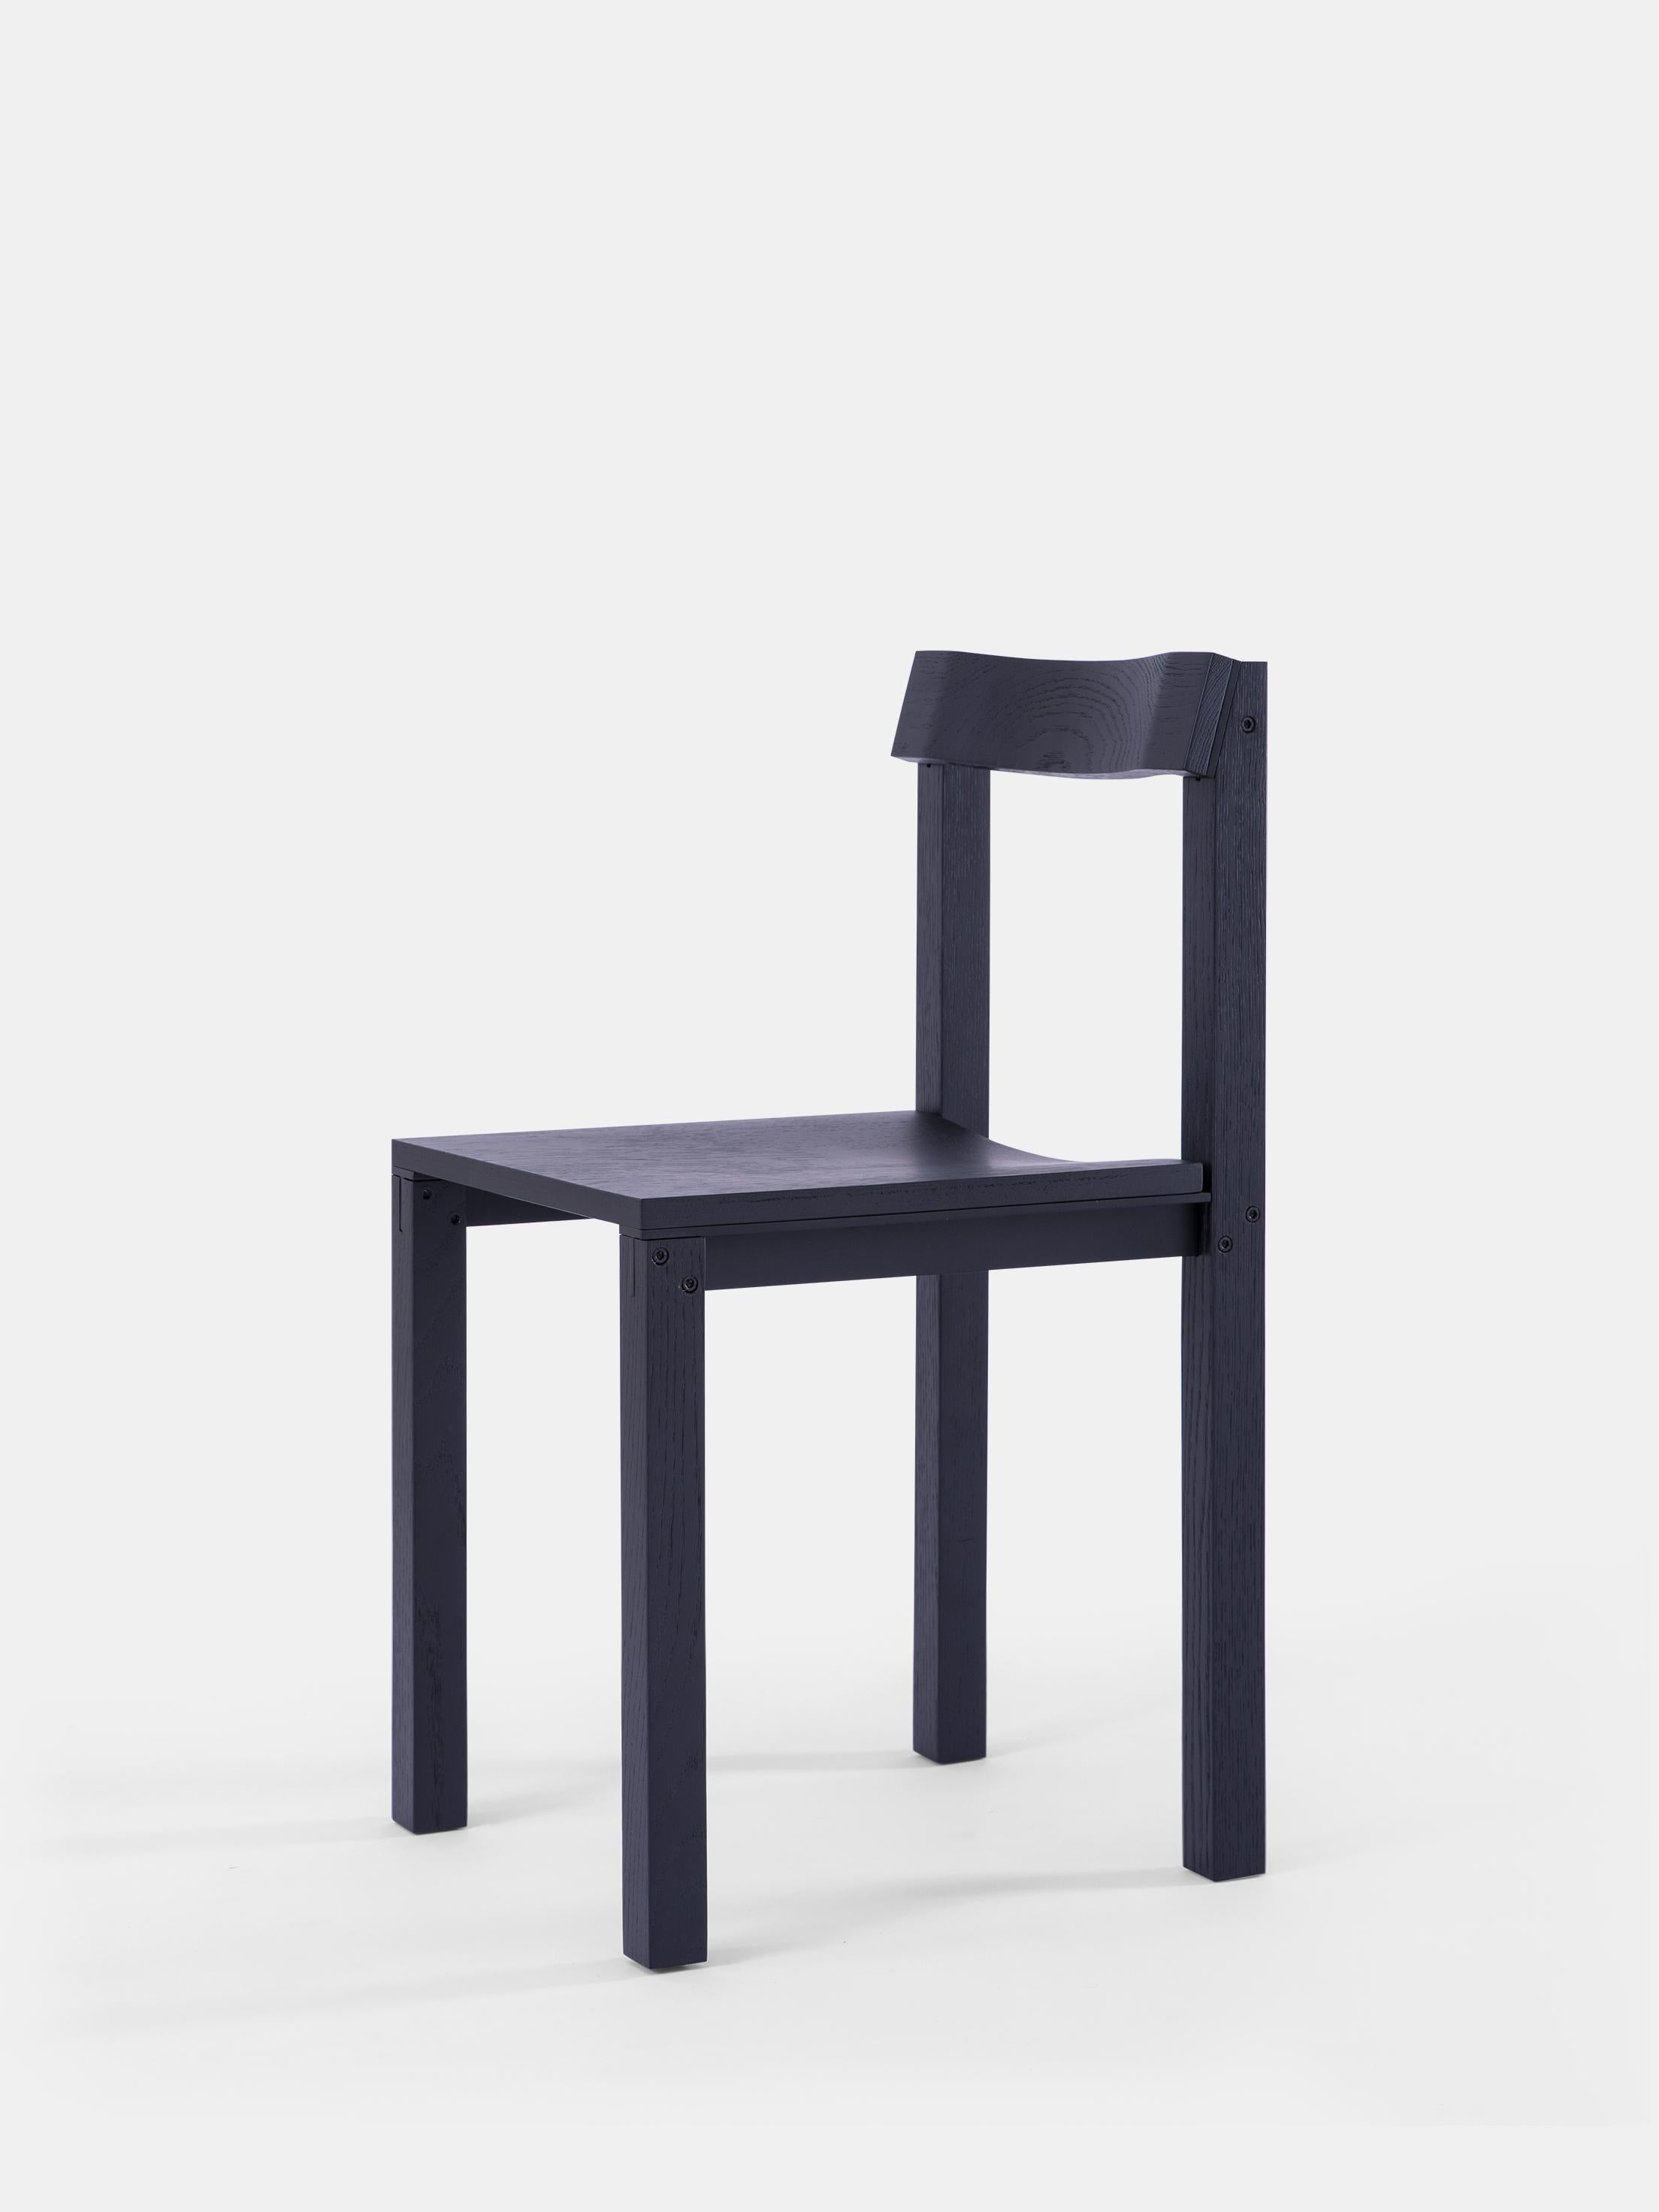 Set of 8 Tal Black Oak Chairs by Kann Design
Dimensions: D 40 x W 44 x H 80 cm.
Materials: Black lacquered oak, aluminum.
Available in other finishes.

The Tal chair designed by Léonard Kadid is made of aluminium and wood.
The T aluminium profiles